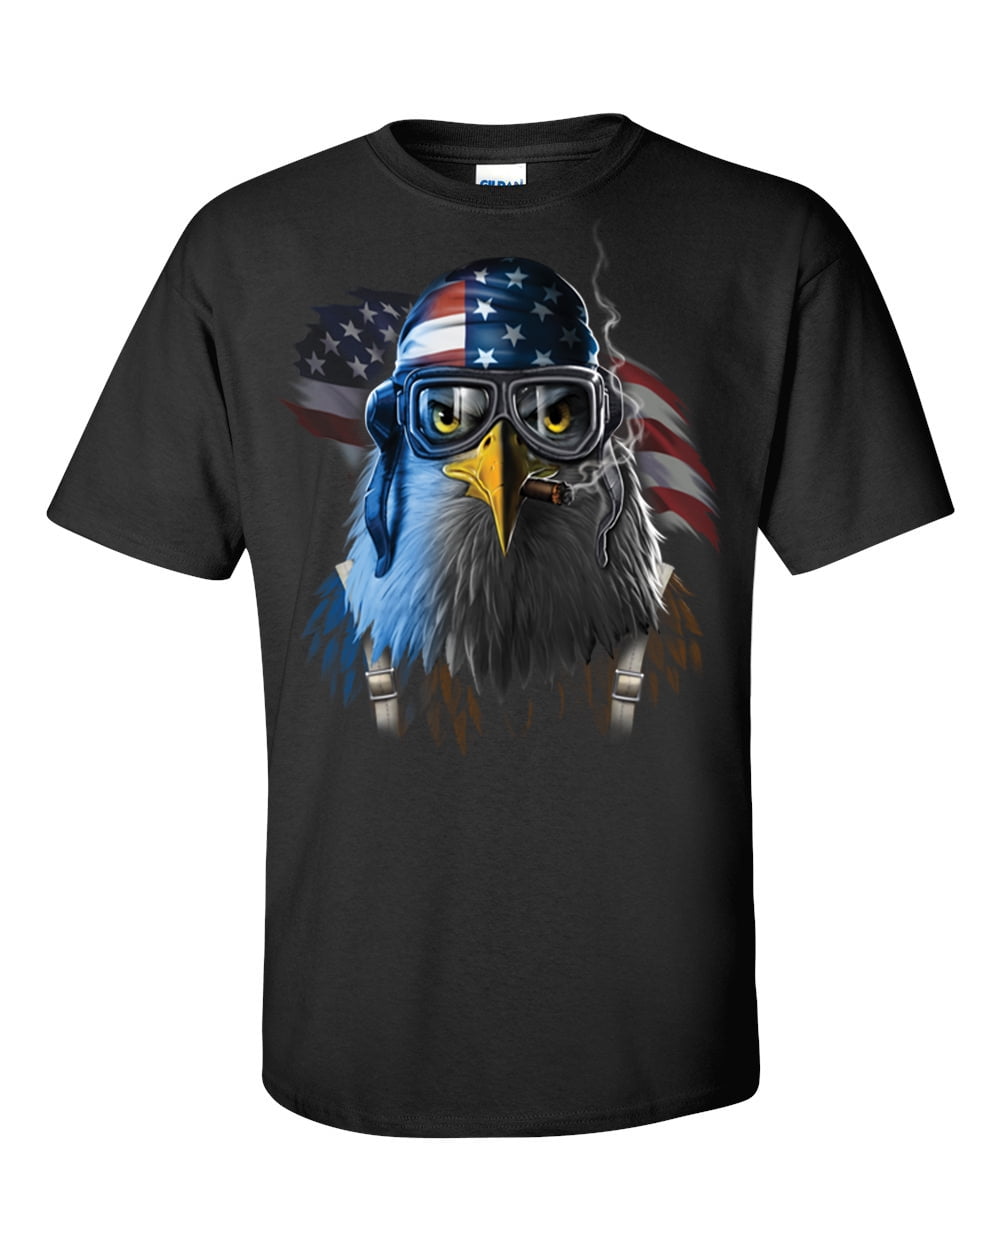 American Eagle Freedom Fighter Women T-shirt S-3XL New 